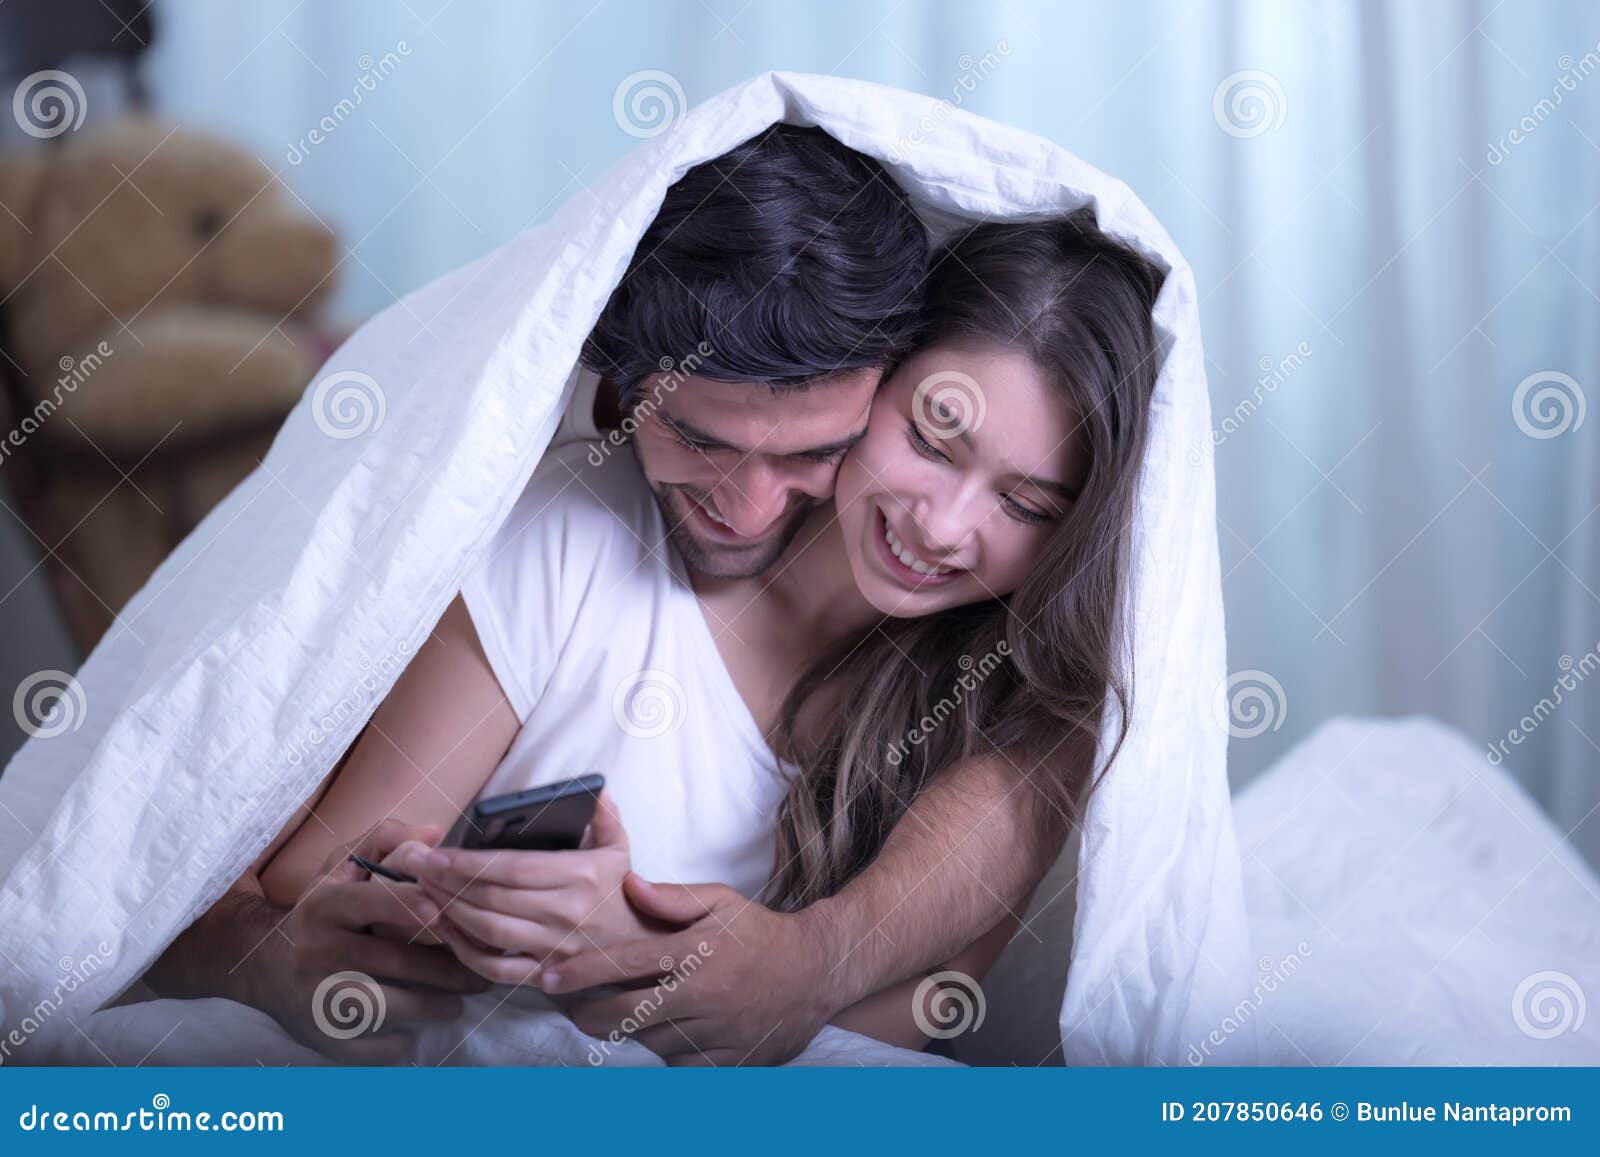 Funny Married Couple Lying in Bed and Hiding Under White Blanket Stock  Photo - Image of closeness, hiding: 207850646